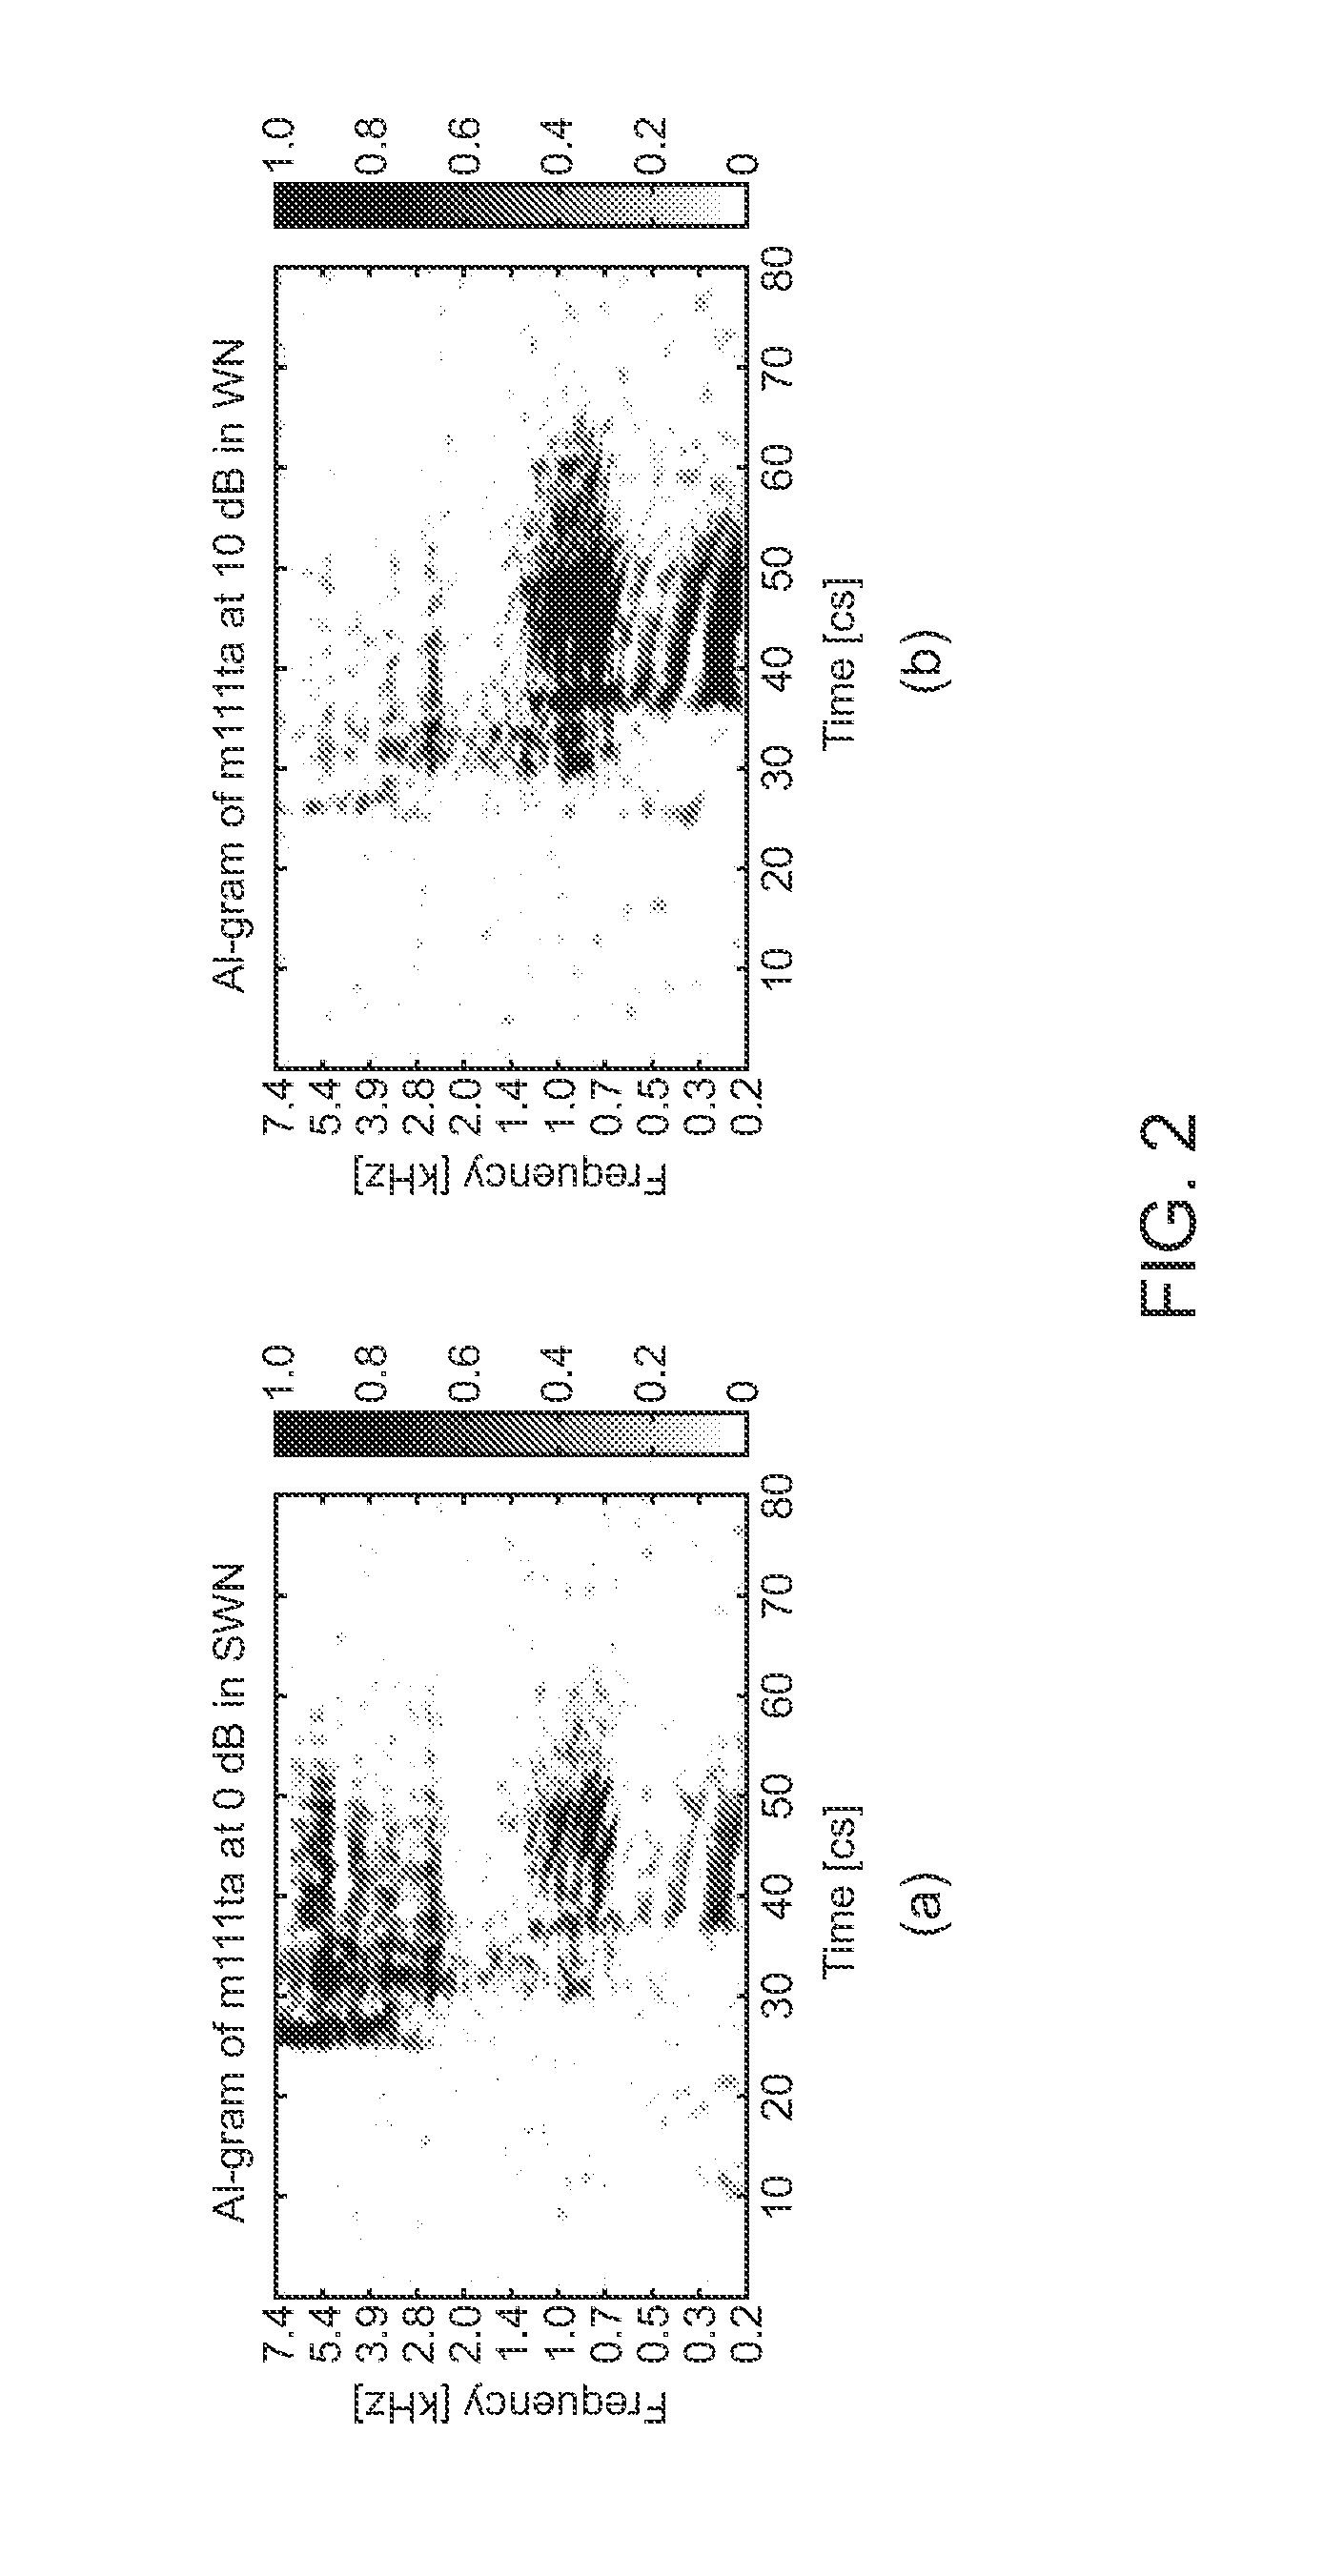 Systems and methods for identifying speech sound features